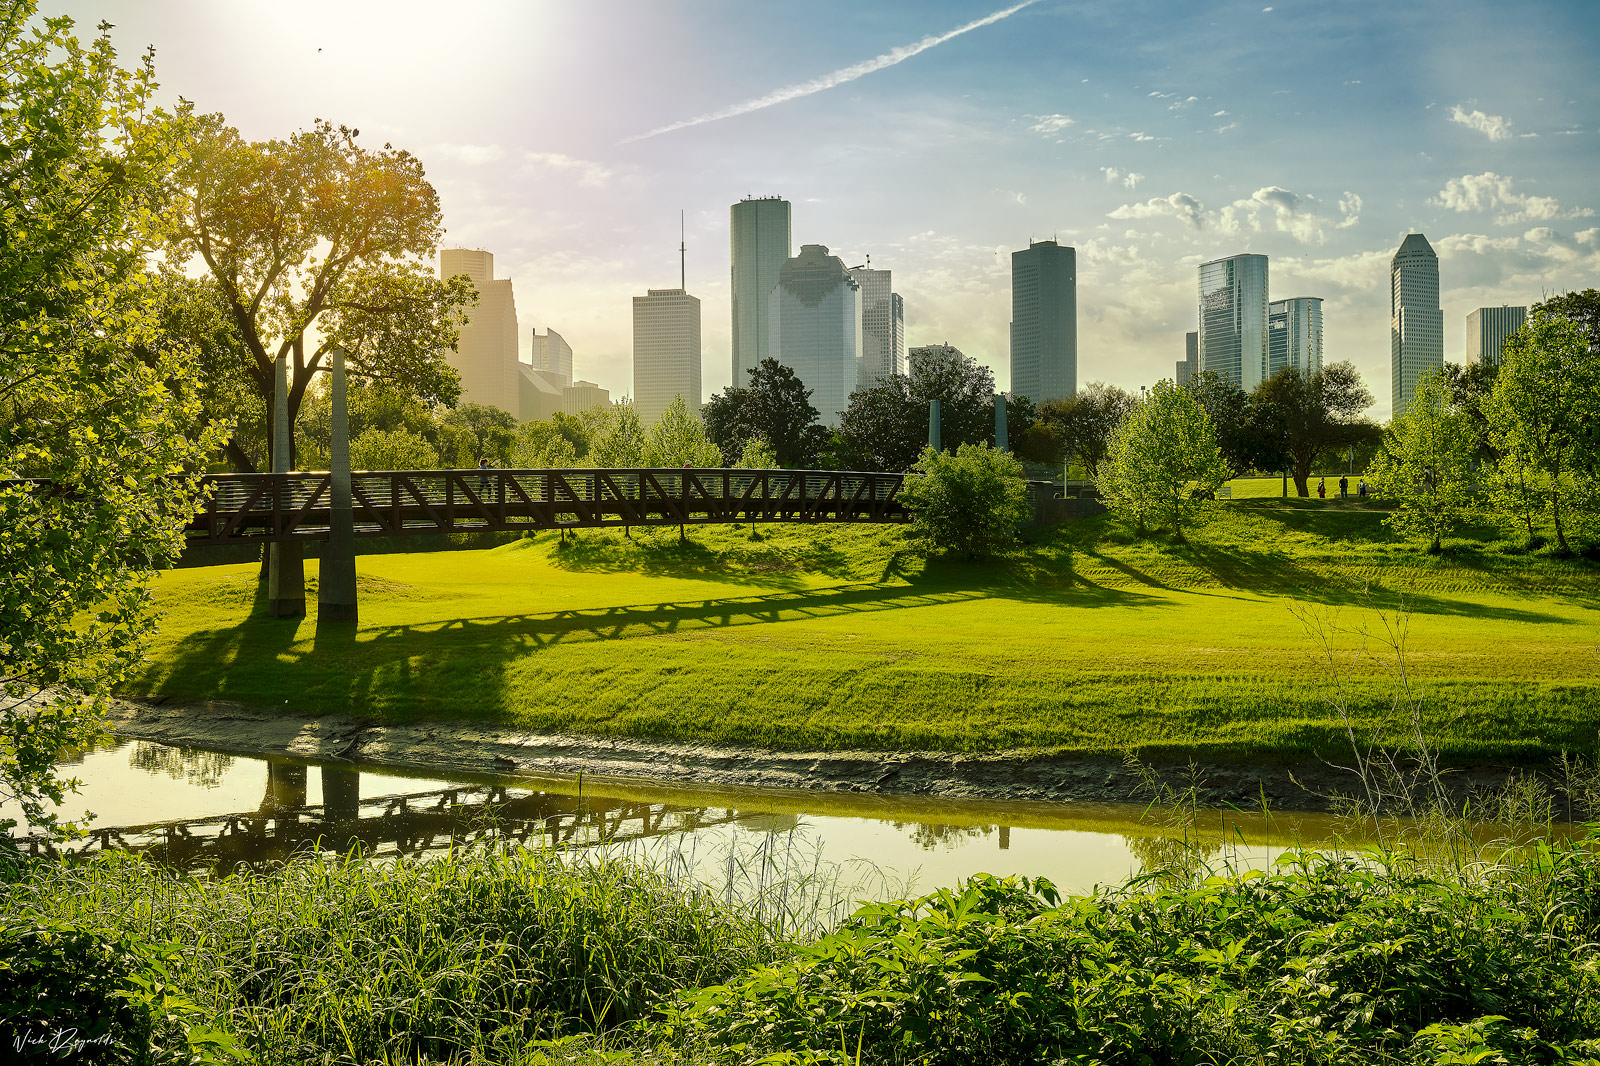 Buffalo Bayou Park and trail with a view of the bayou, pedestrian bridge, and downtown Houston